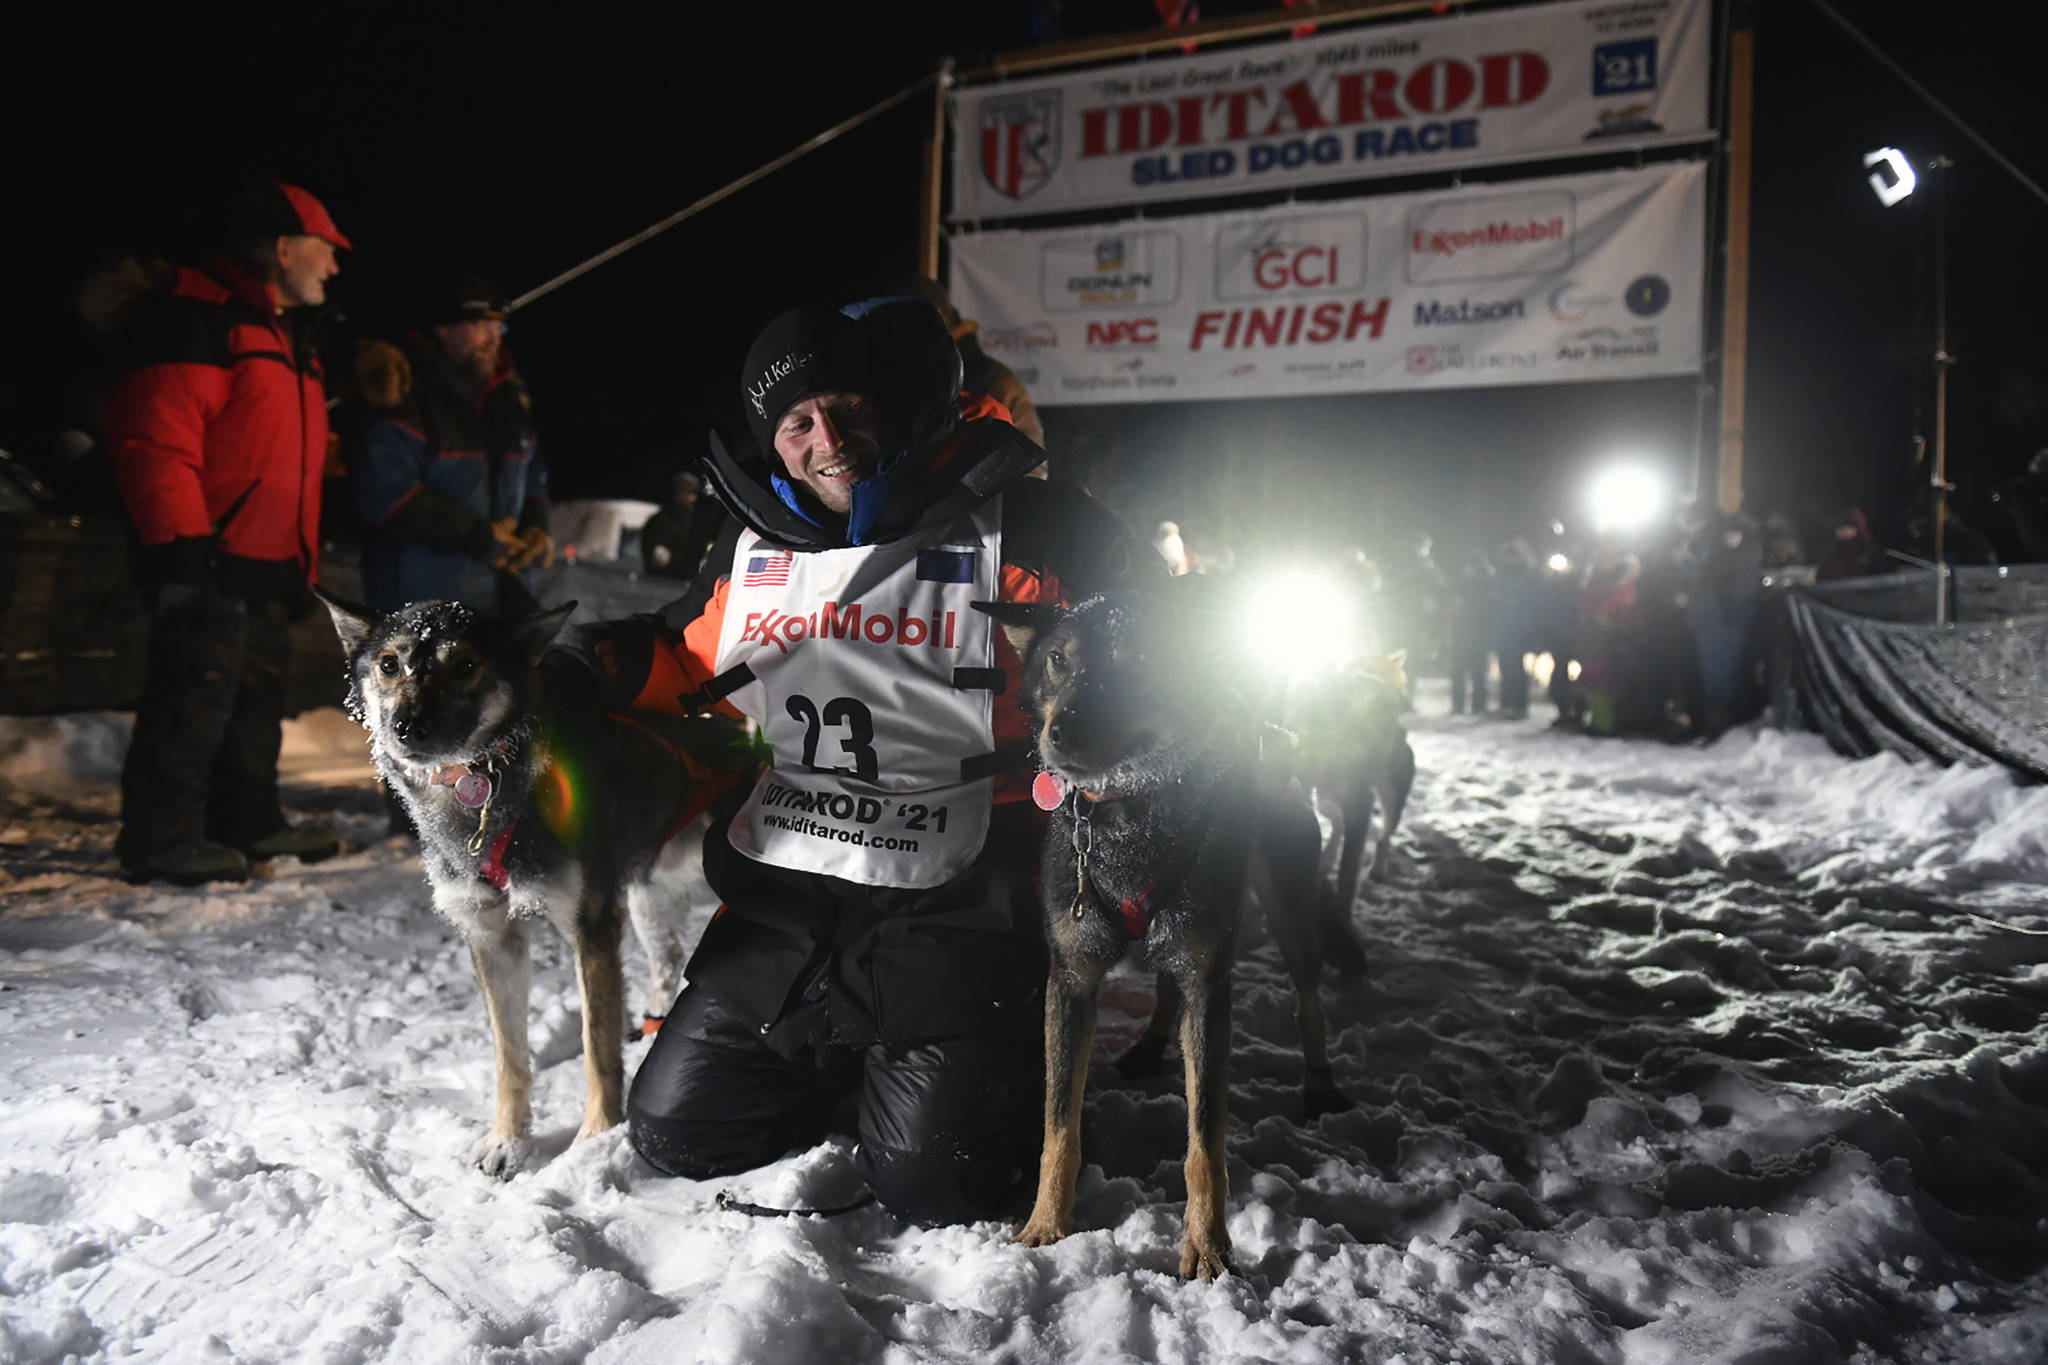 Dallas Seavey poses with his dogs after crossing the finish line to win the Iditarod Trail Sled Dog Race race near Willow, Alaska, early Monday, March 15, 2021. (Marc Lester/Anchorage Daily News, Pool)